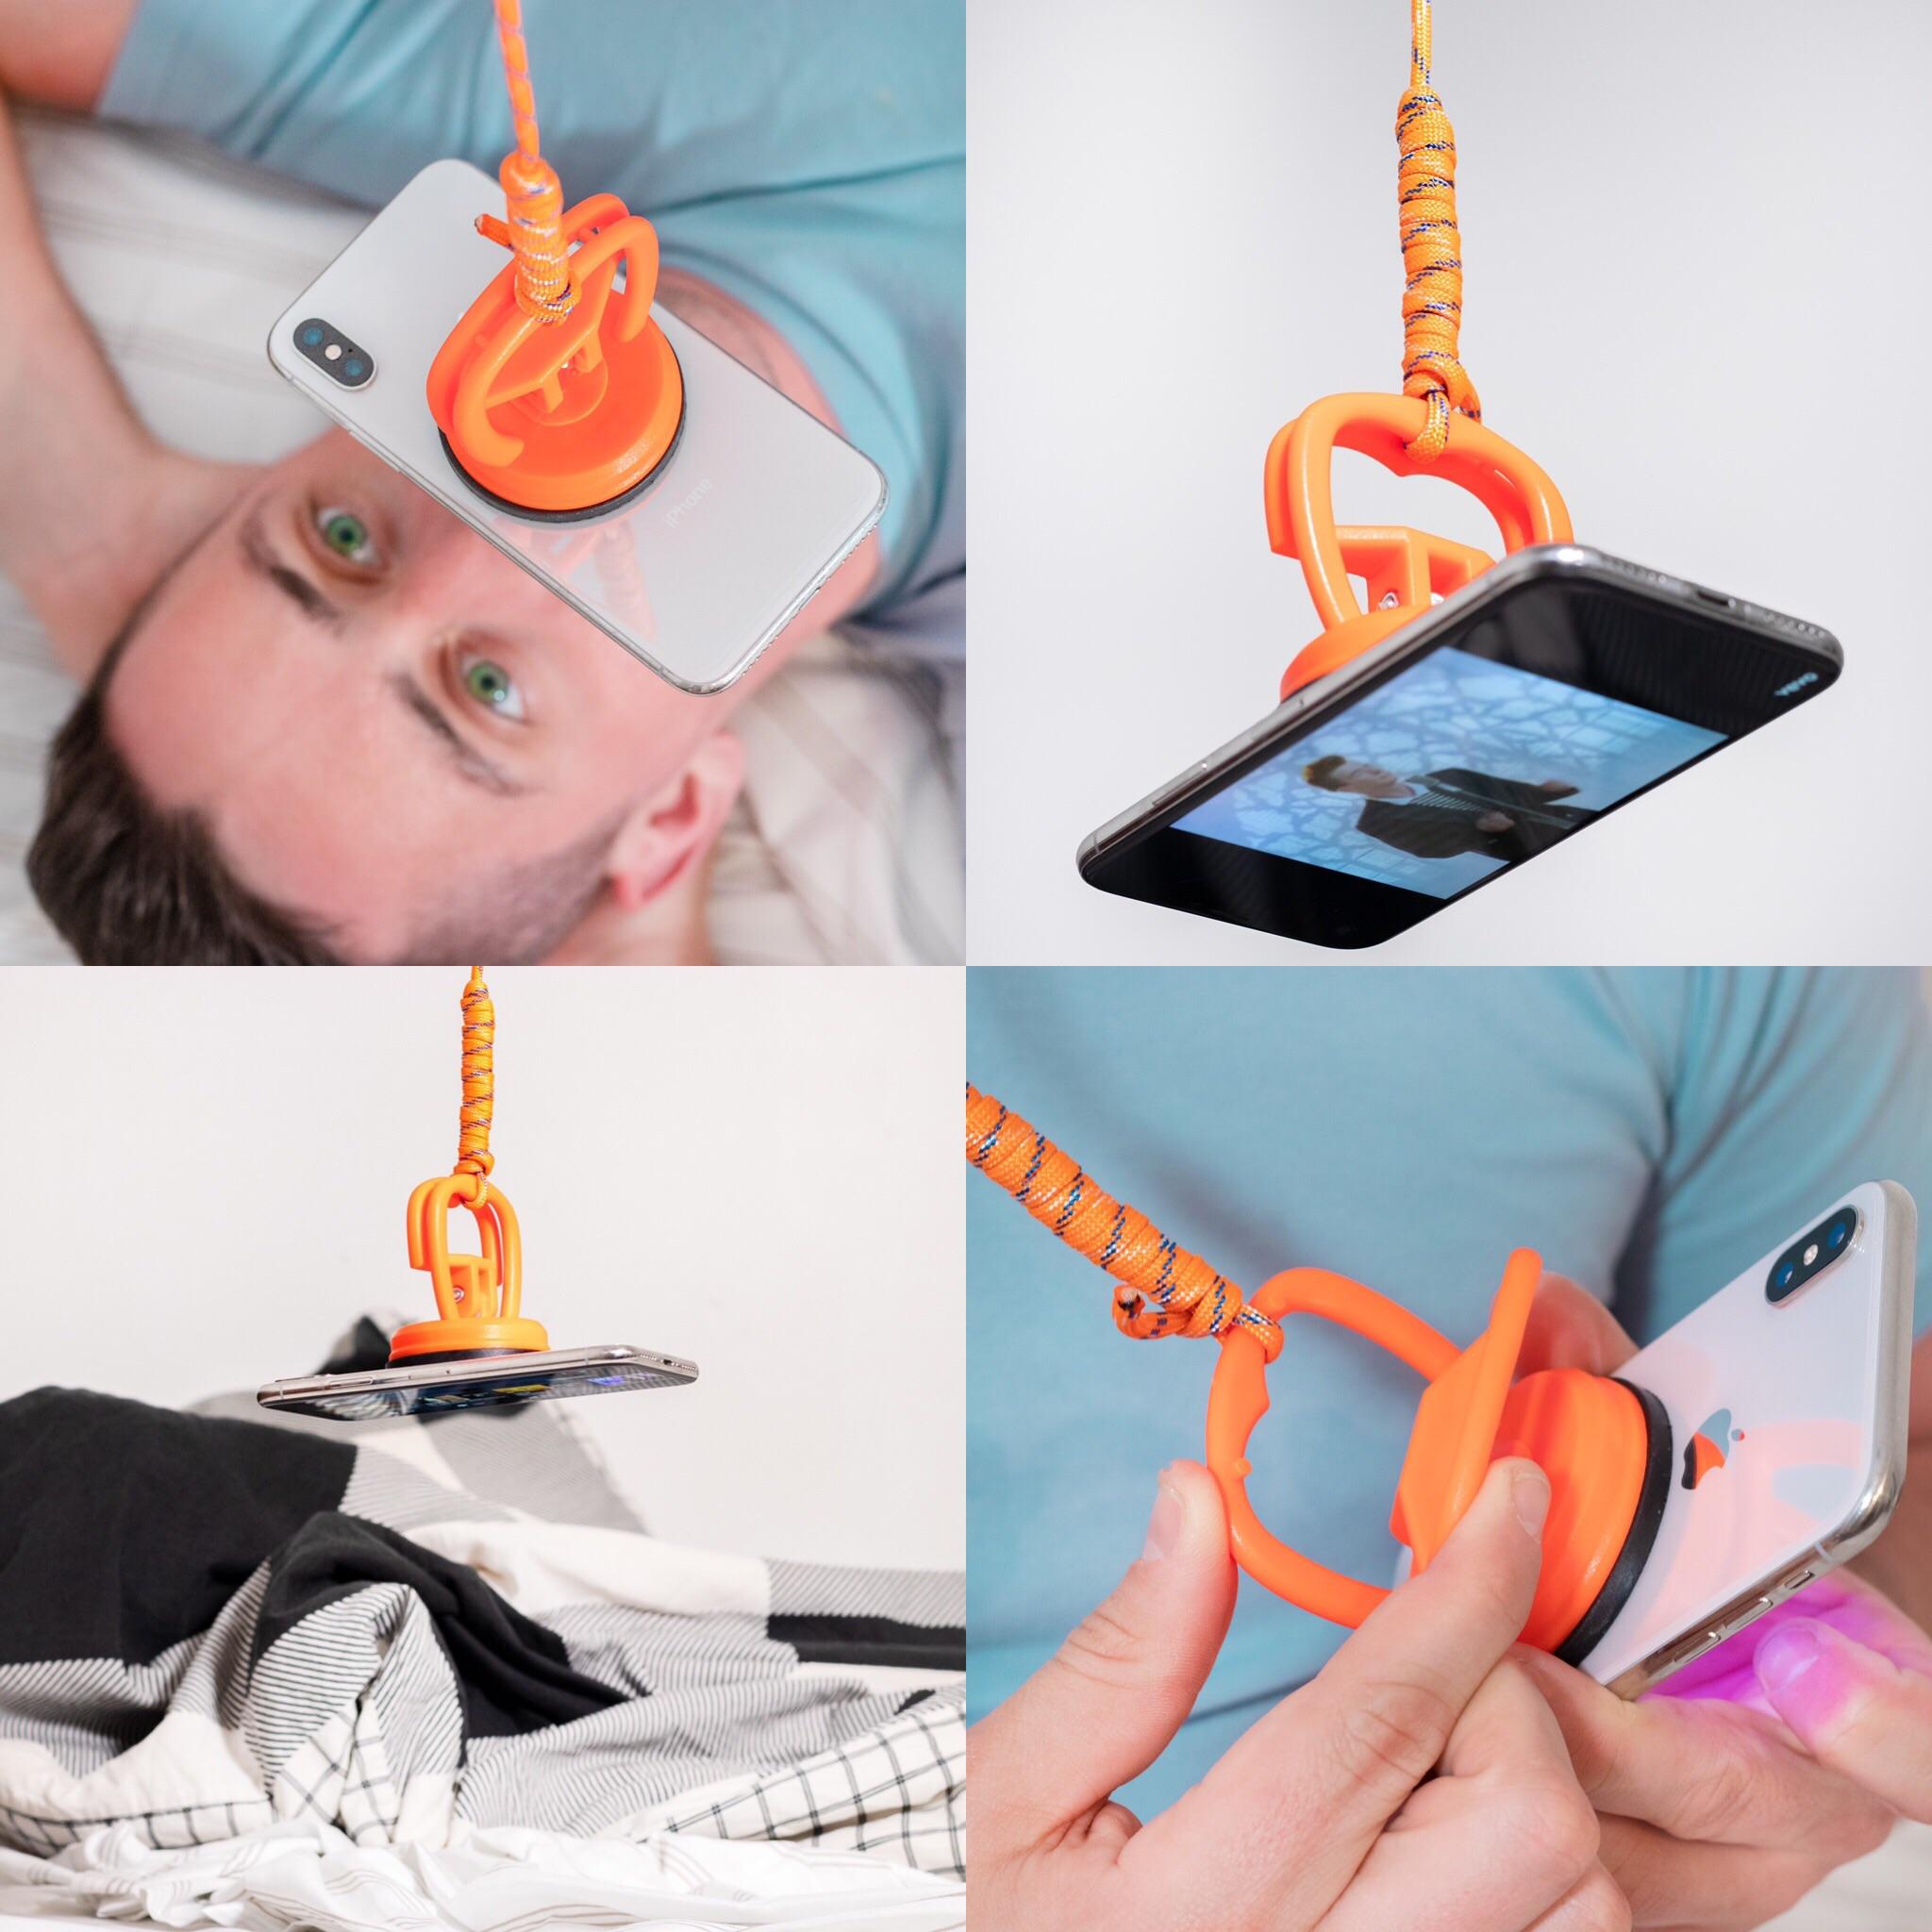 The latest in iPhone and iPhone accessories.